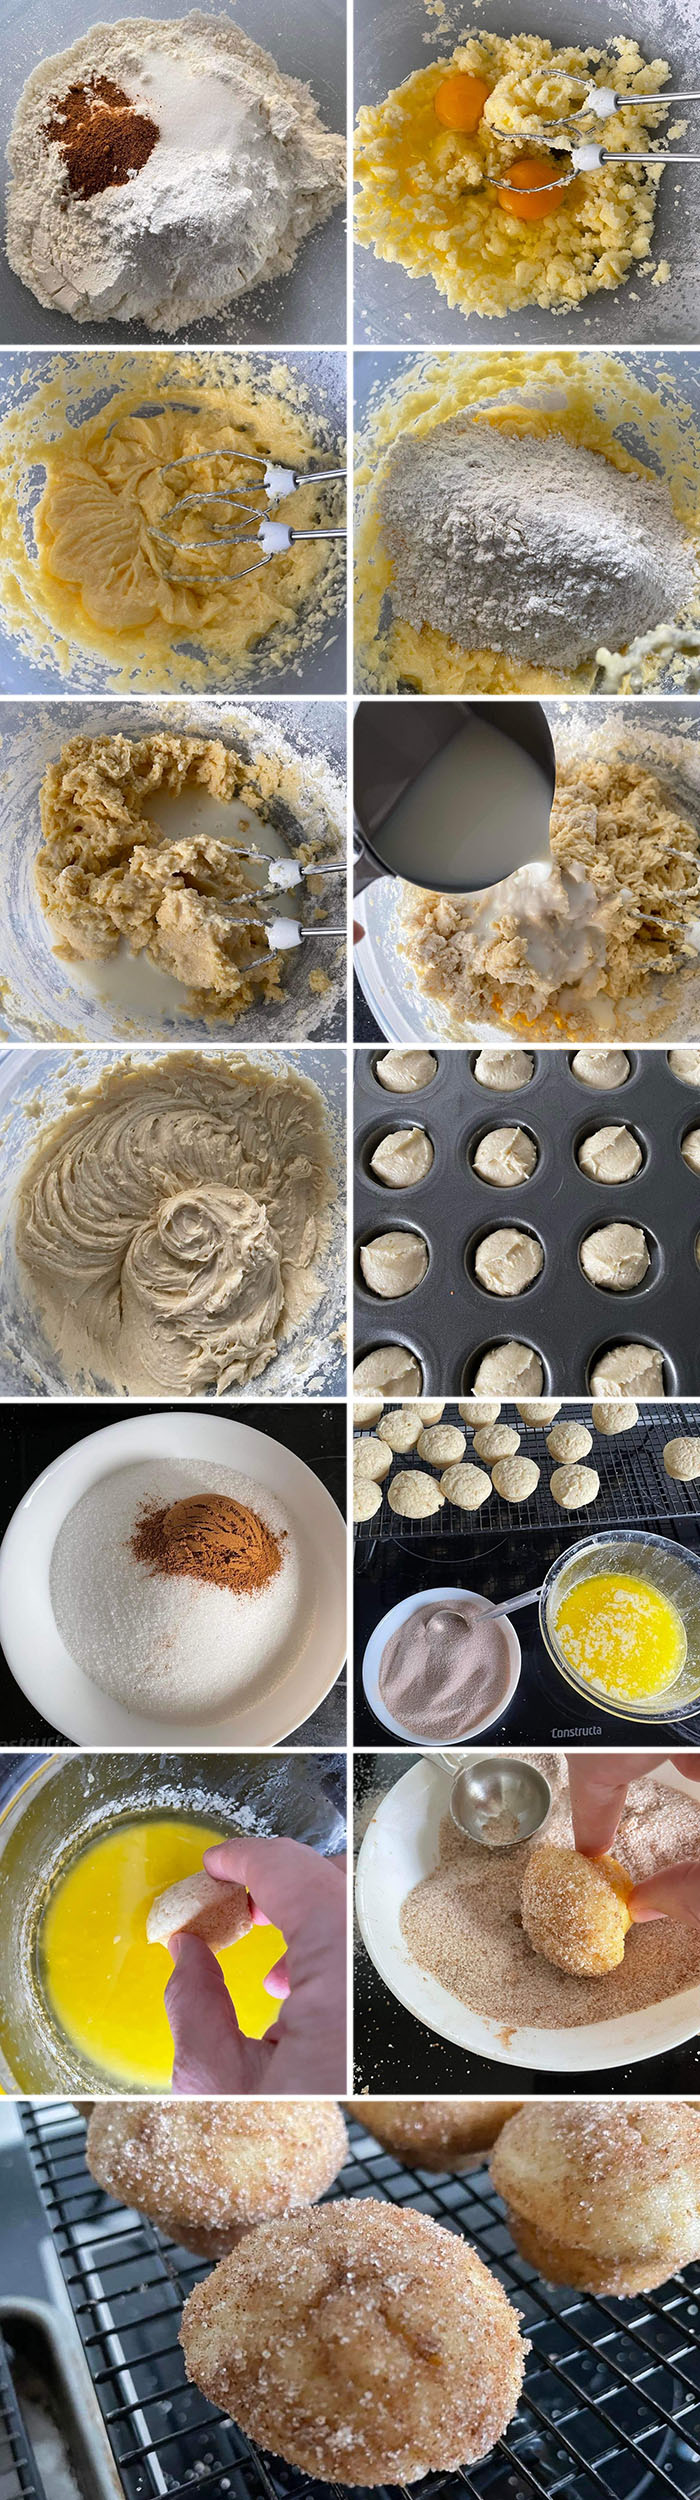 13-photo picture collage of step-by-step photos of how to make French Breakfast Puffs.